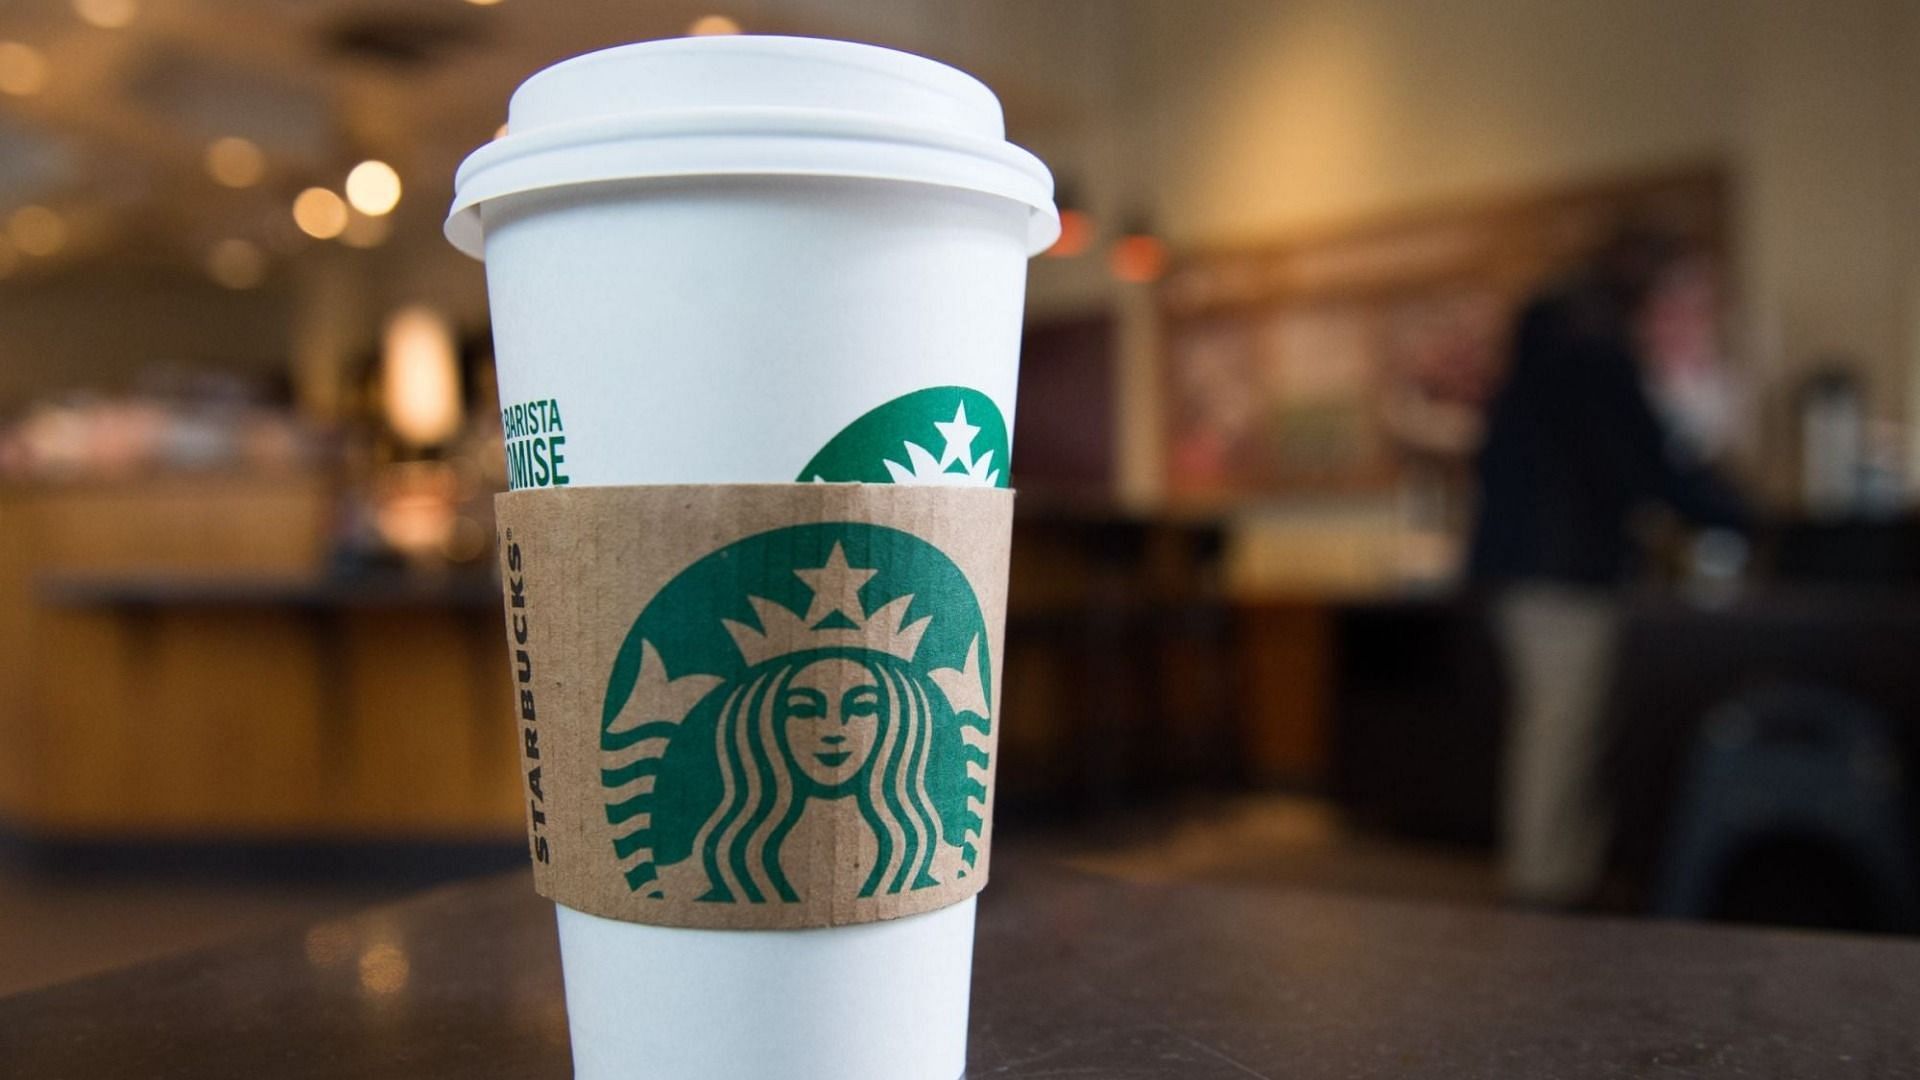 Starbucks might eliminate its disposable green-and-white cups to become a &quot;resource positive company&quot; (Image via Getty Images/ Saul Loeb)